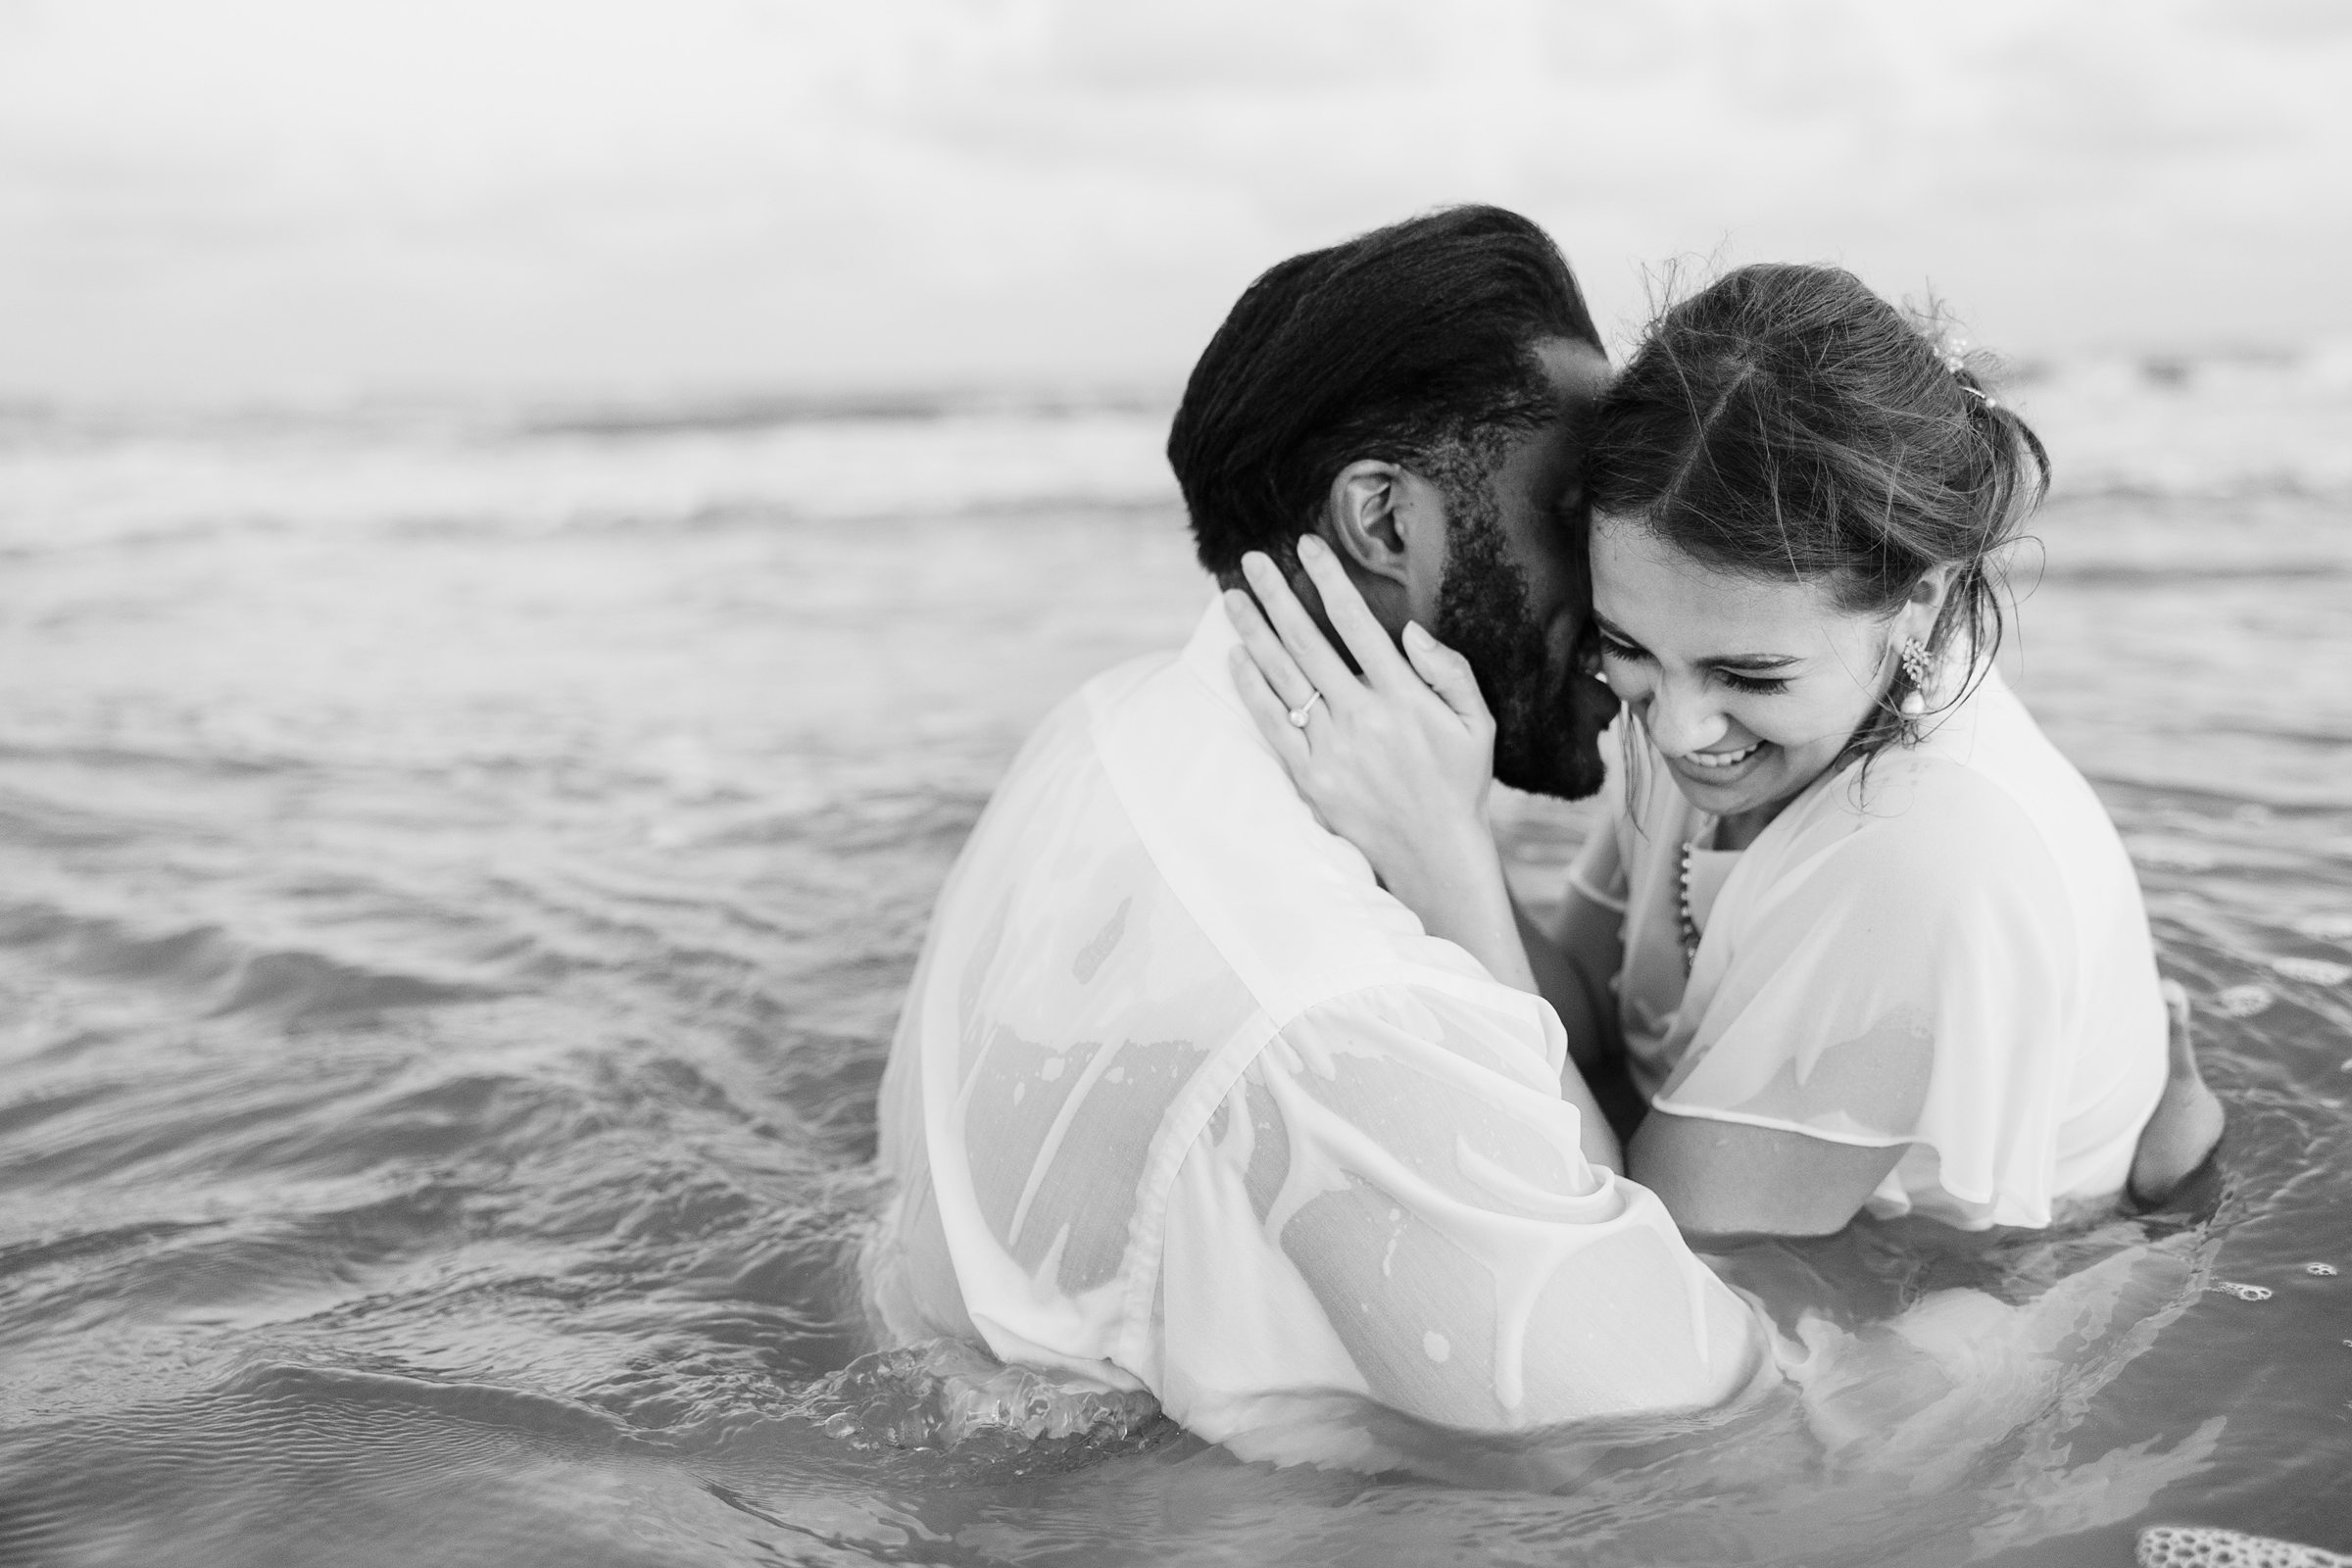 Couple embrace during their session at Galveston Beach in Texas.